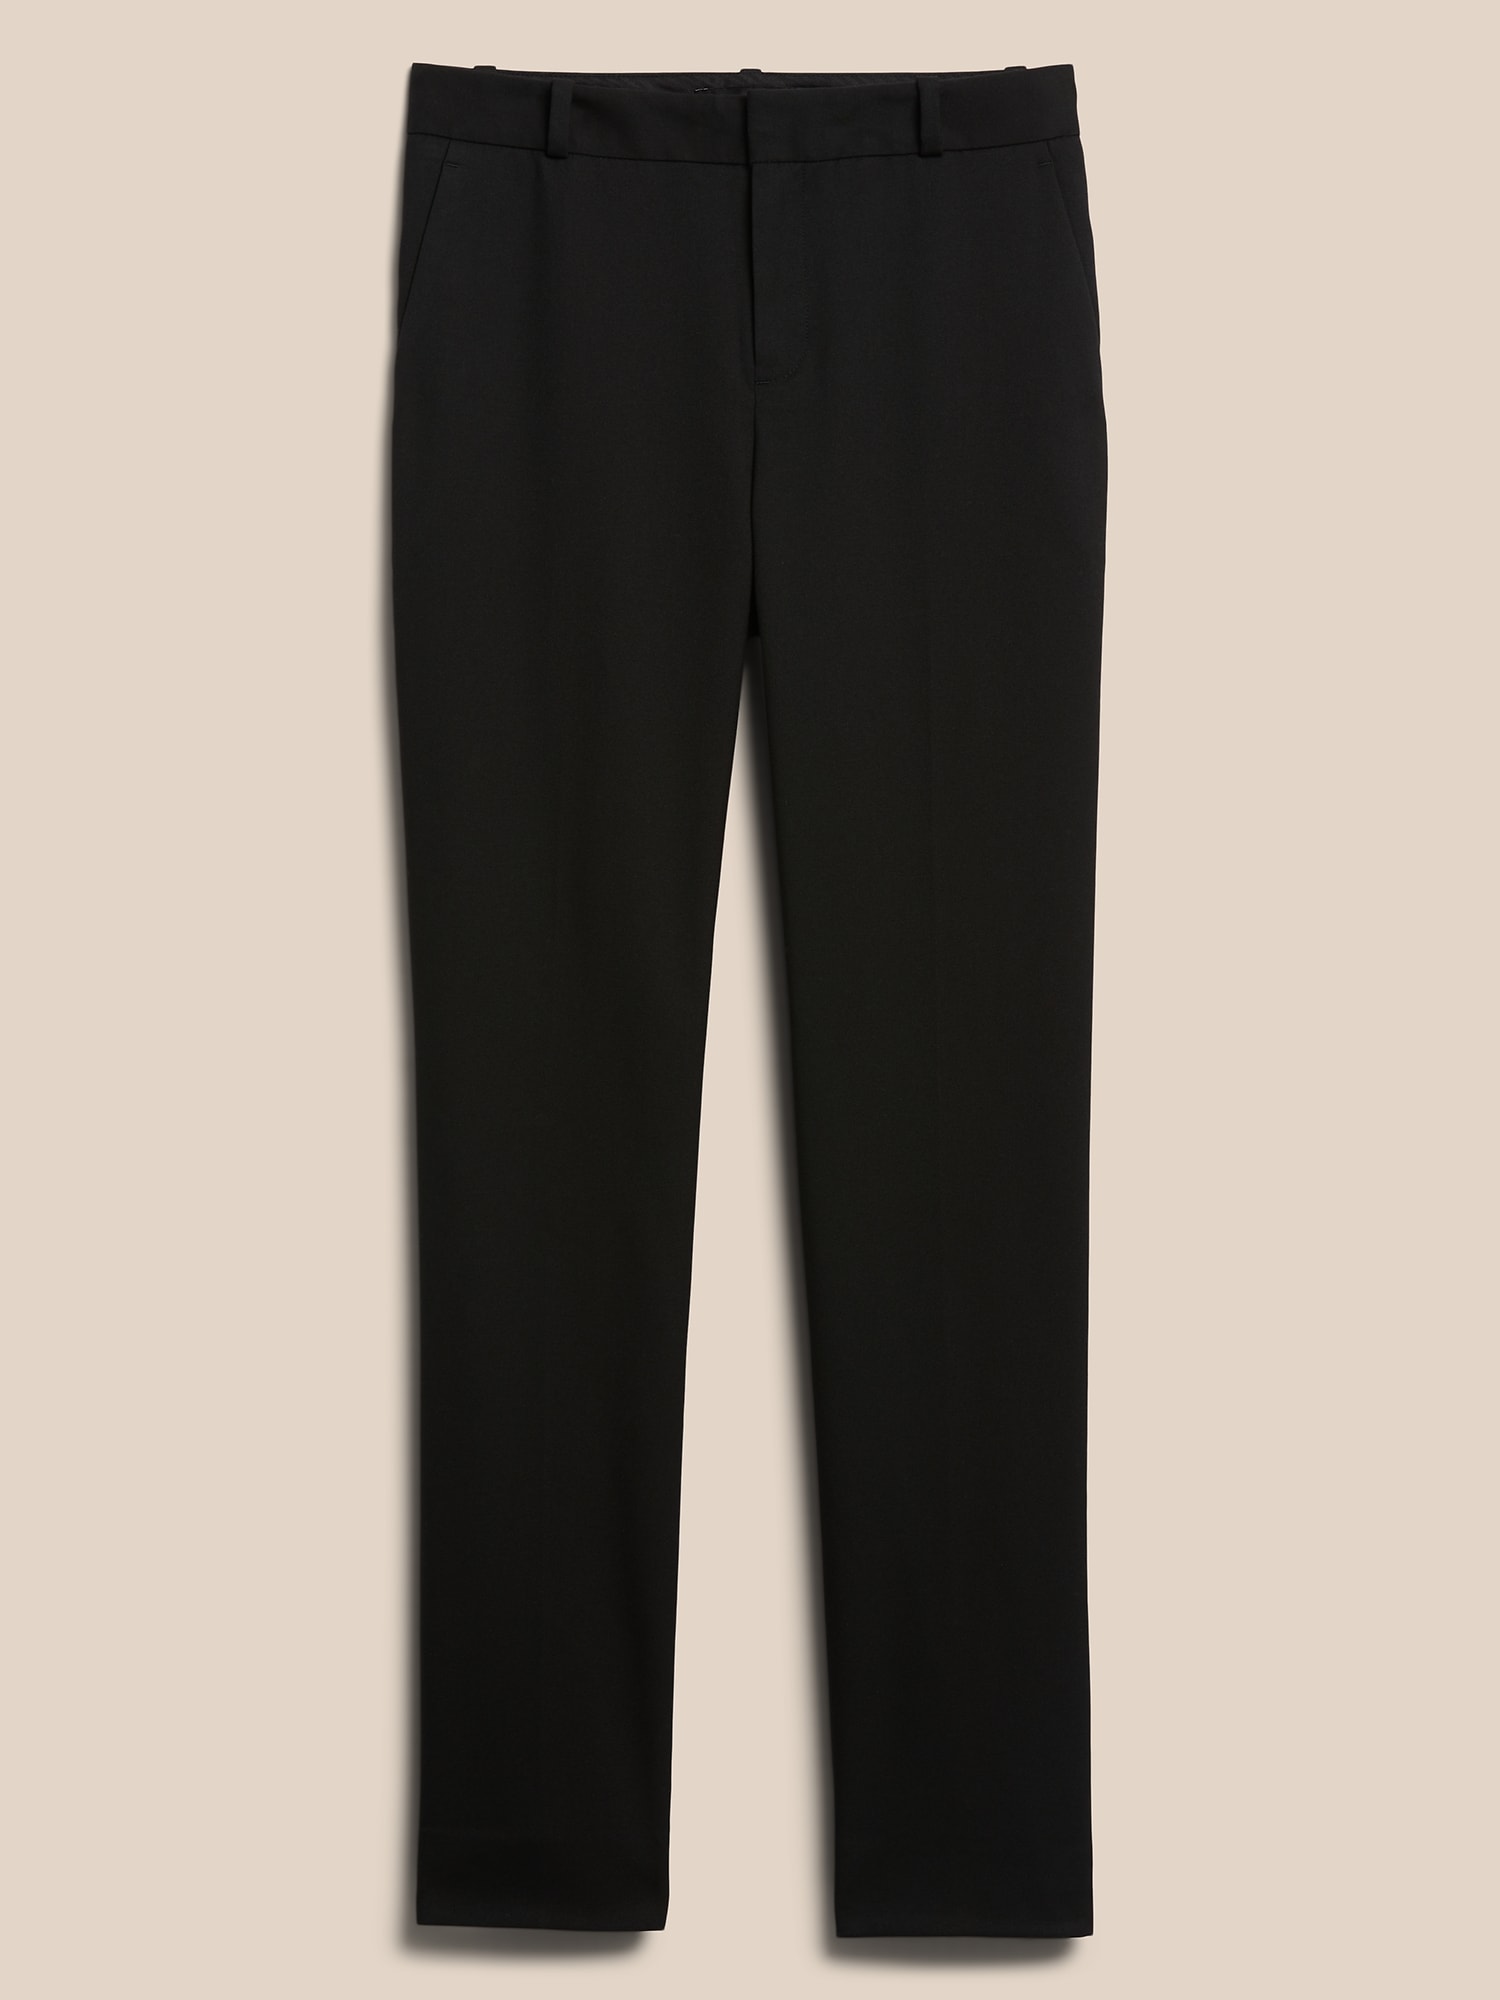 Washable Ryan Twill Classic Straight Suit Pant | Banana Republic Factory